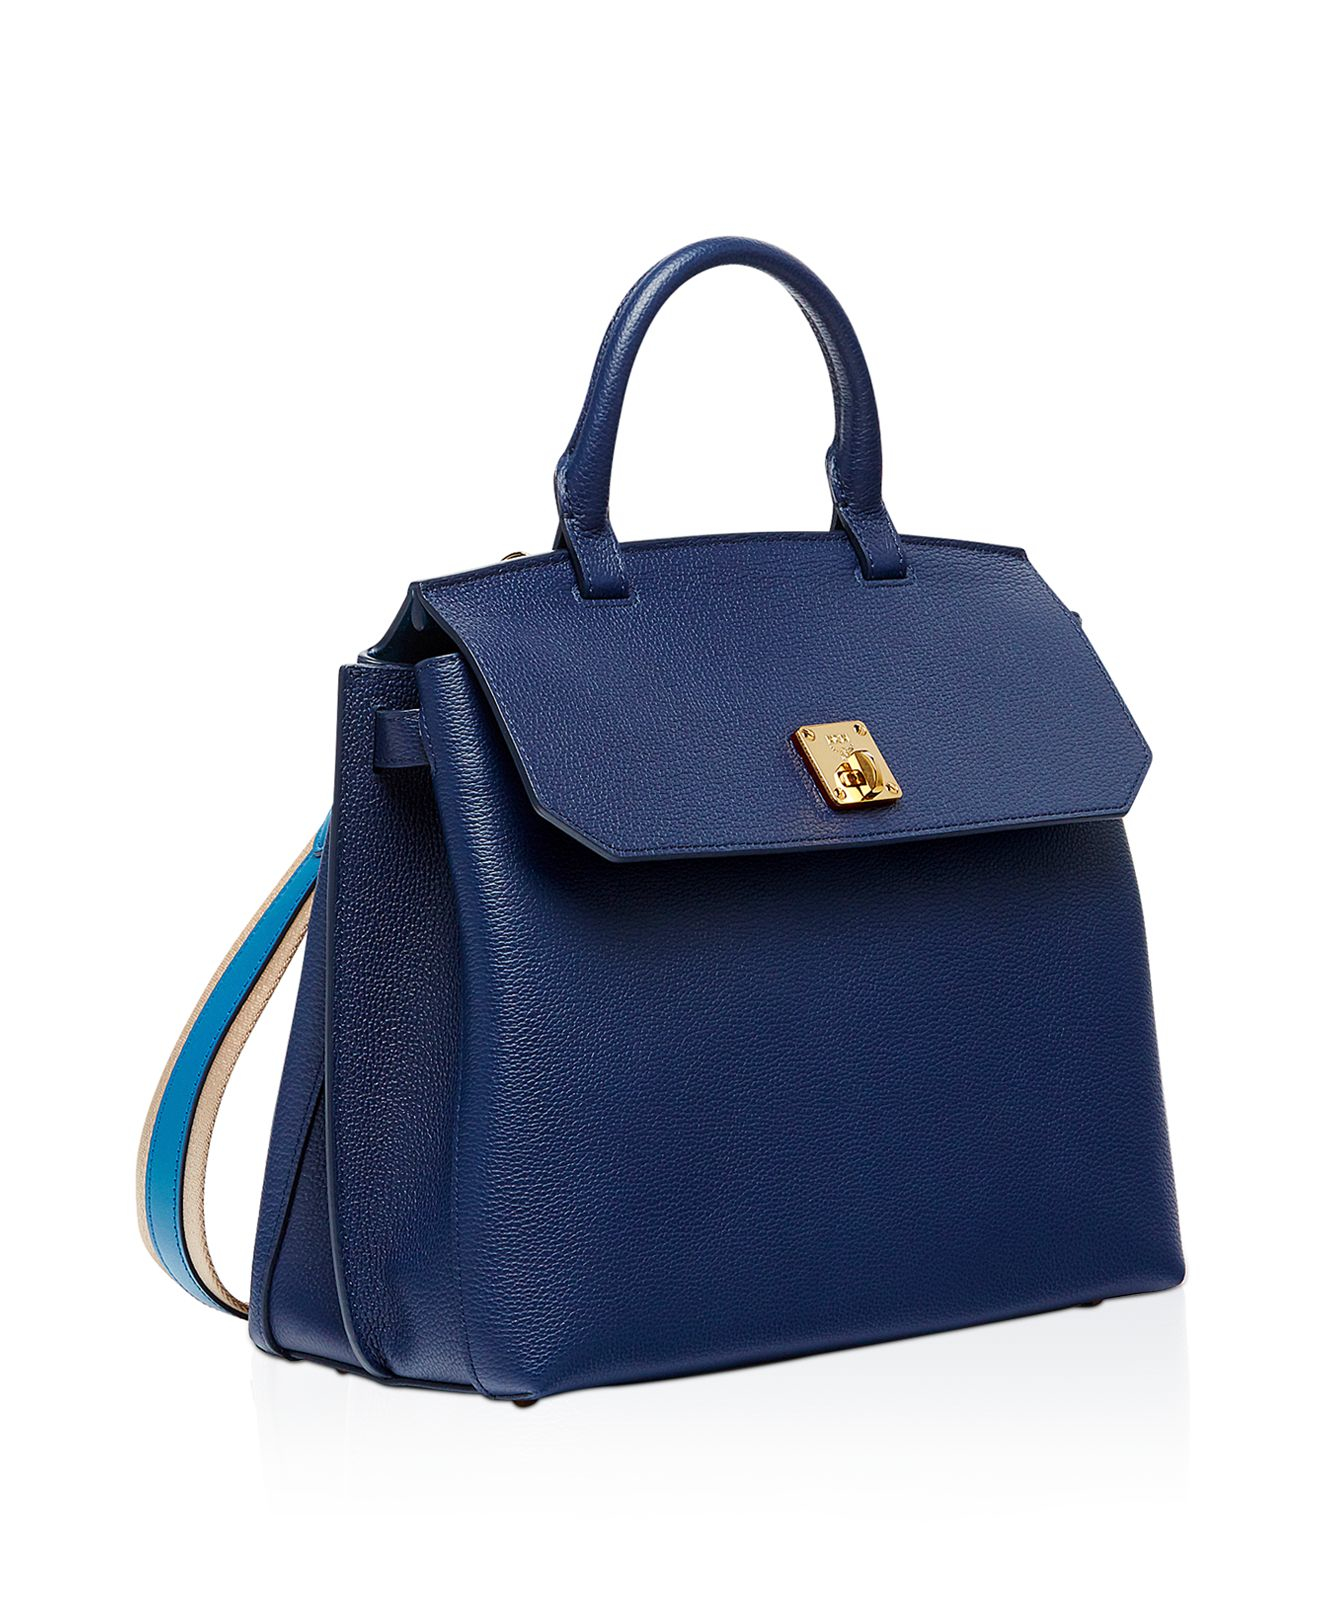 MCM Large Milla Backpack in Blue - Lyst